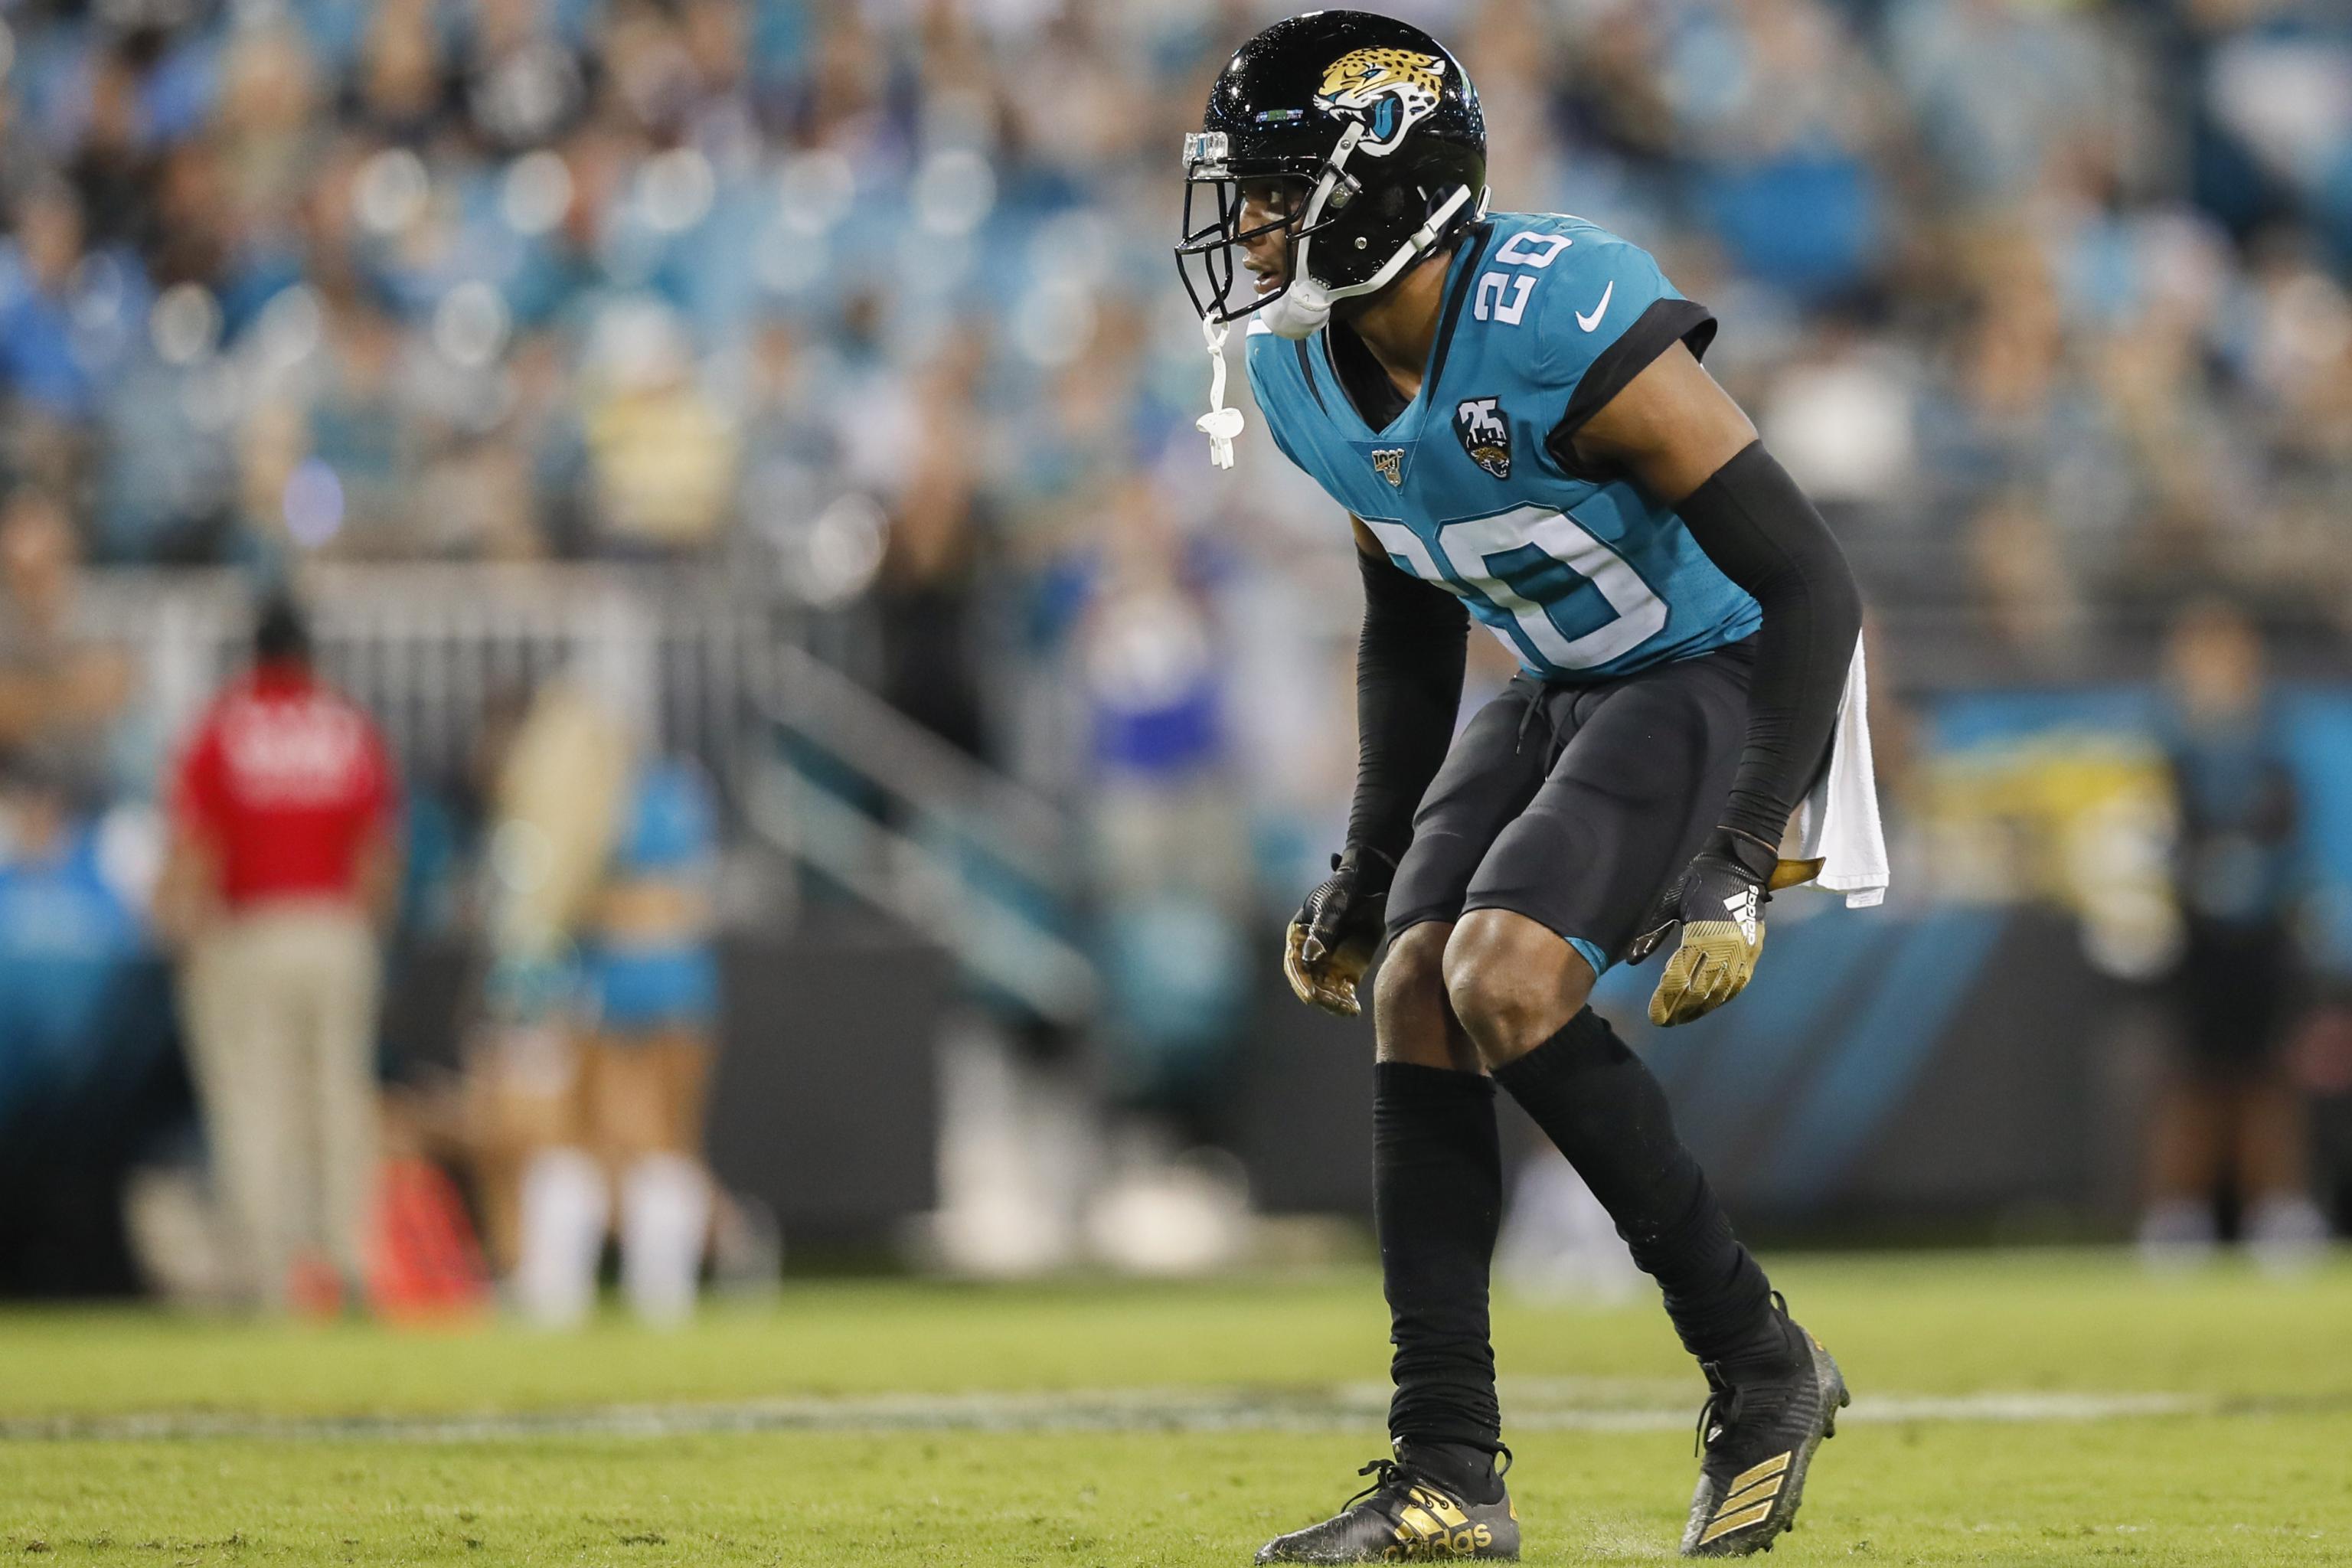 Jaguars CB Jalen Ramsey Traded To Rams For 2 1st Round Draft